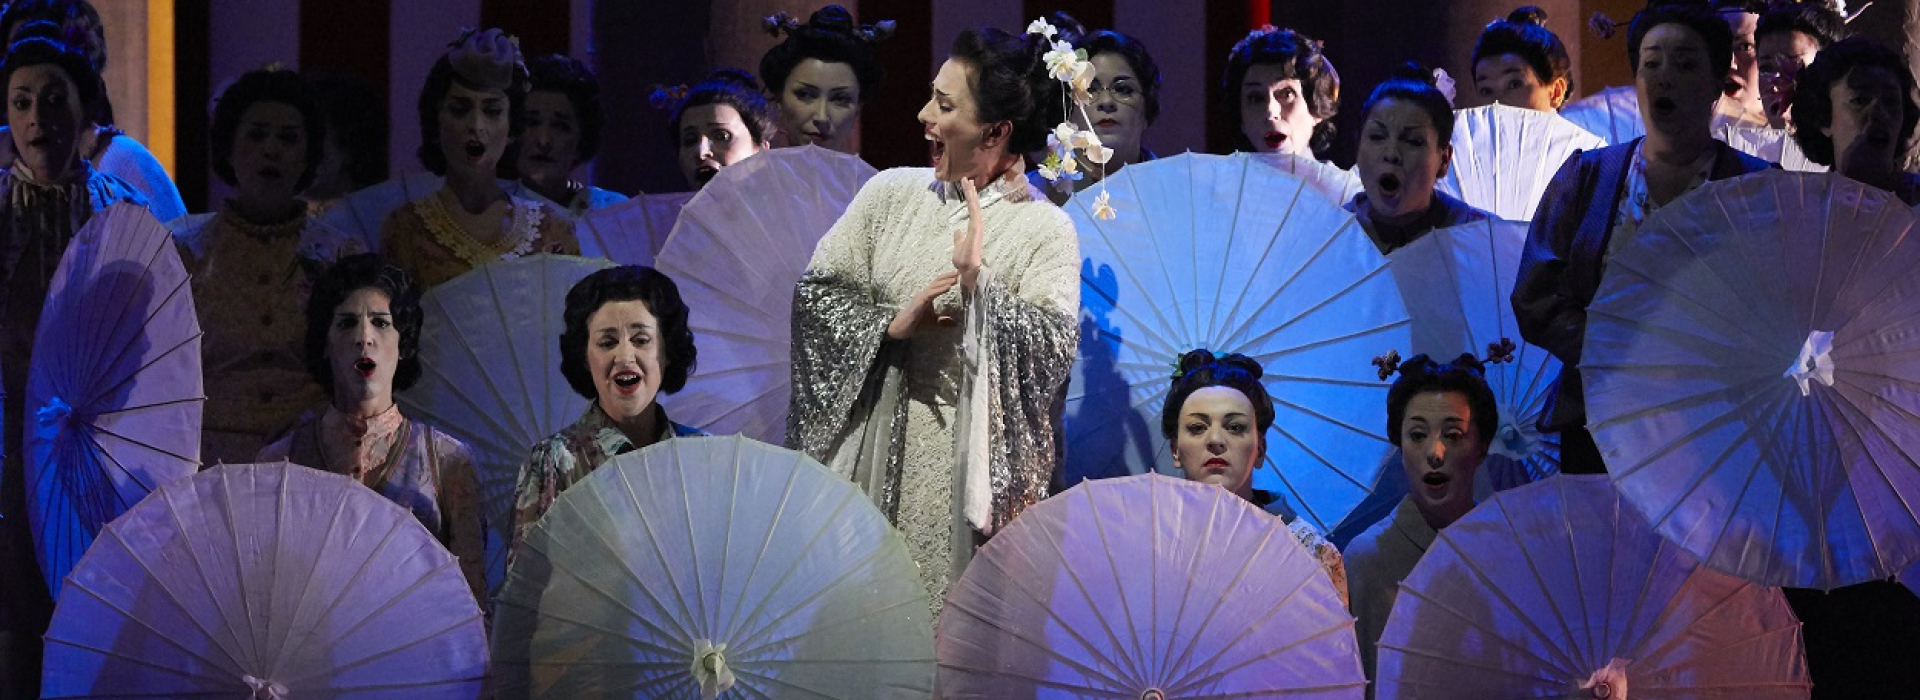 ENJOY OUR OPERA BROADCAST "MADAMA BUTTERFLY" FOR FREE